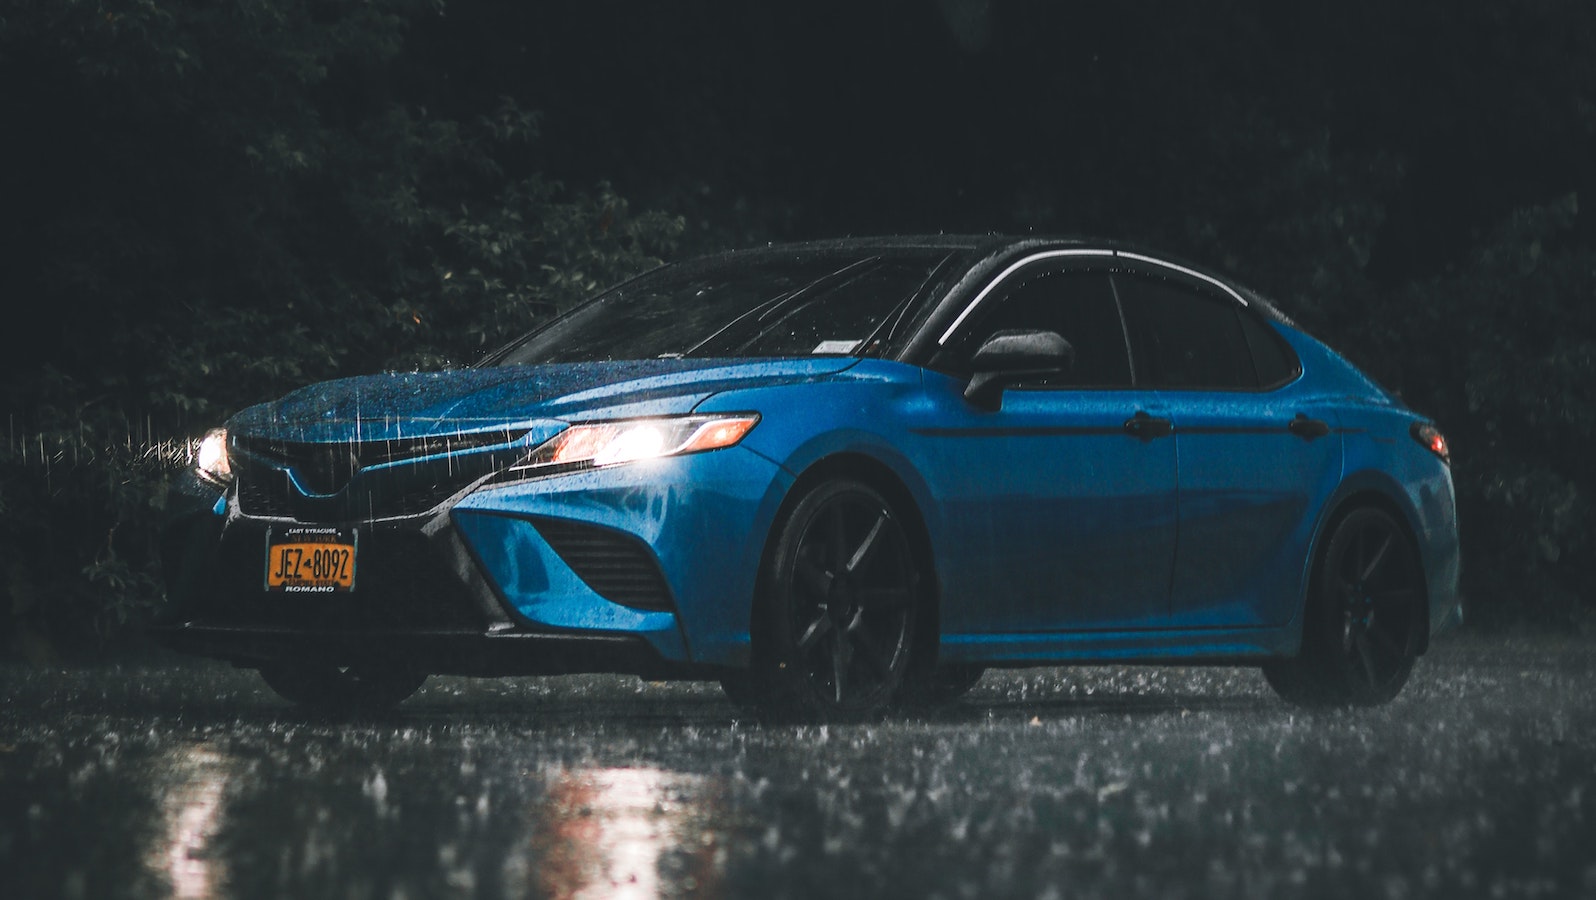 A blue car on a road at night with lights on while it's raining